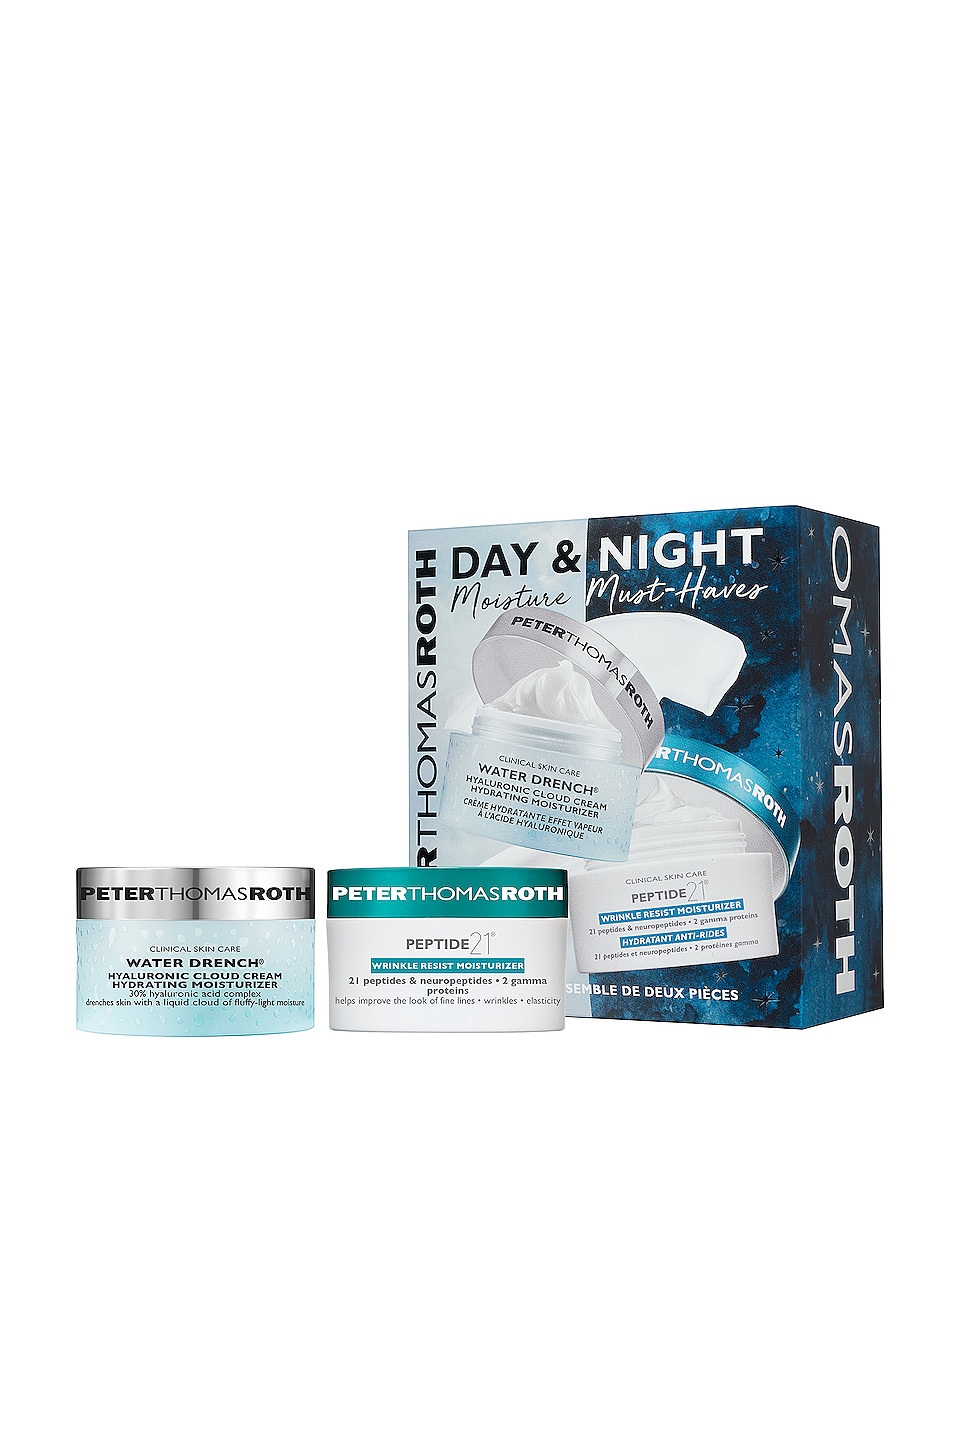 Peter Thomas Roth DAY & NIGHT MOISTURE MUST-HAVES KIT